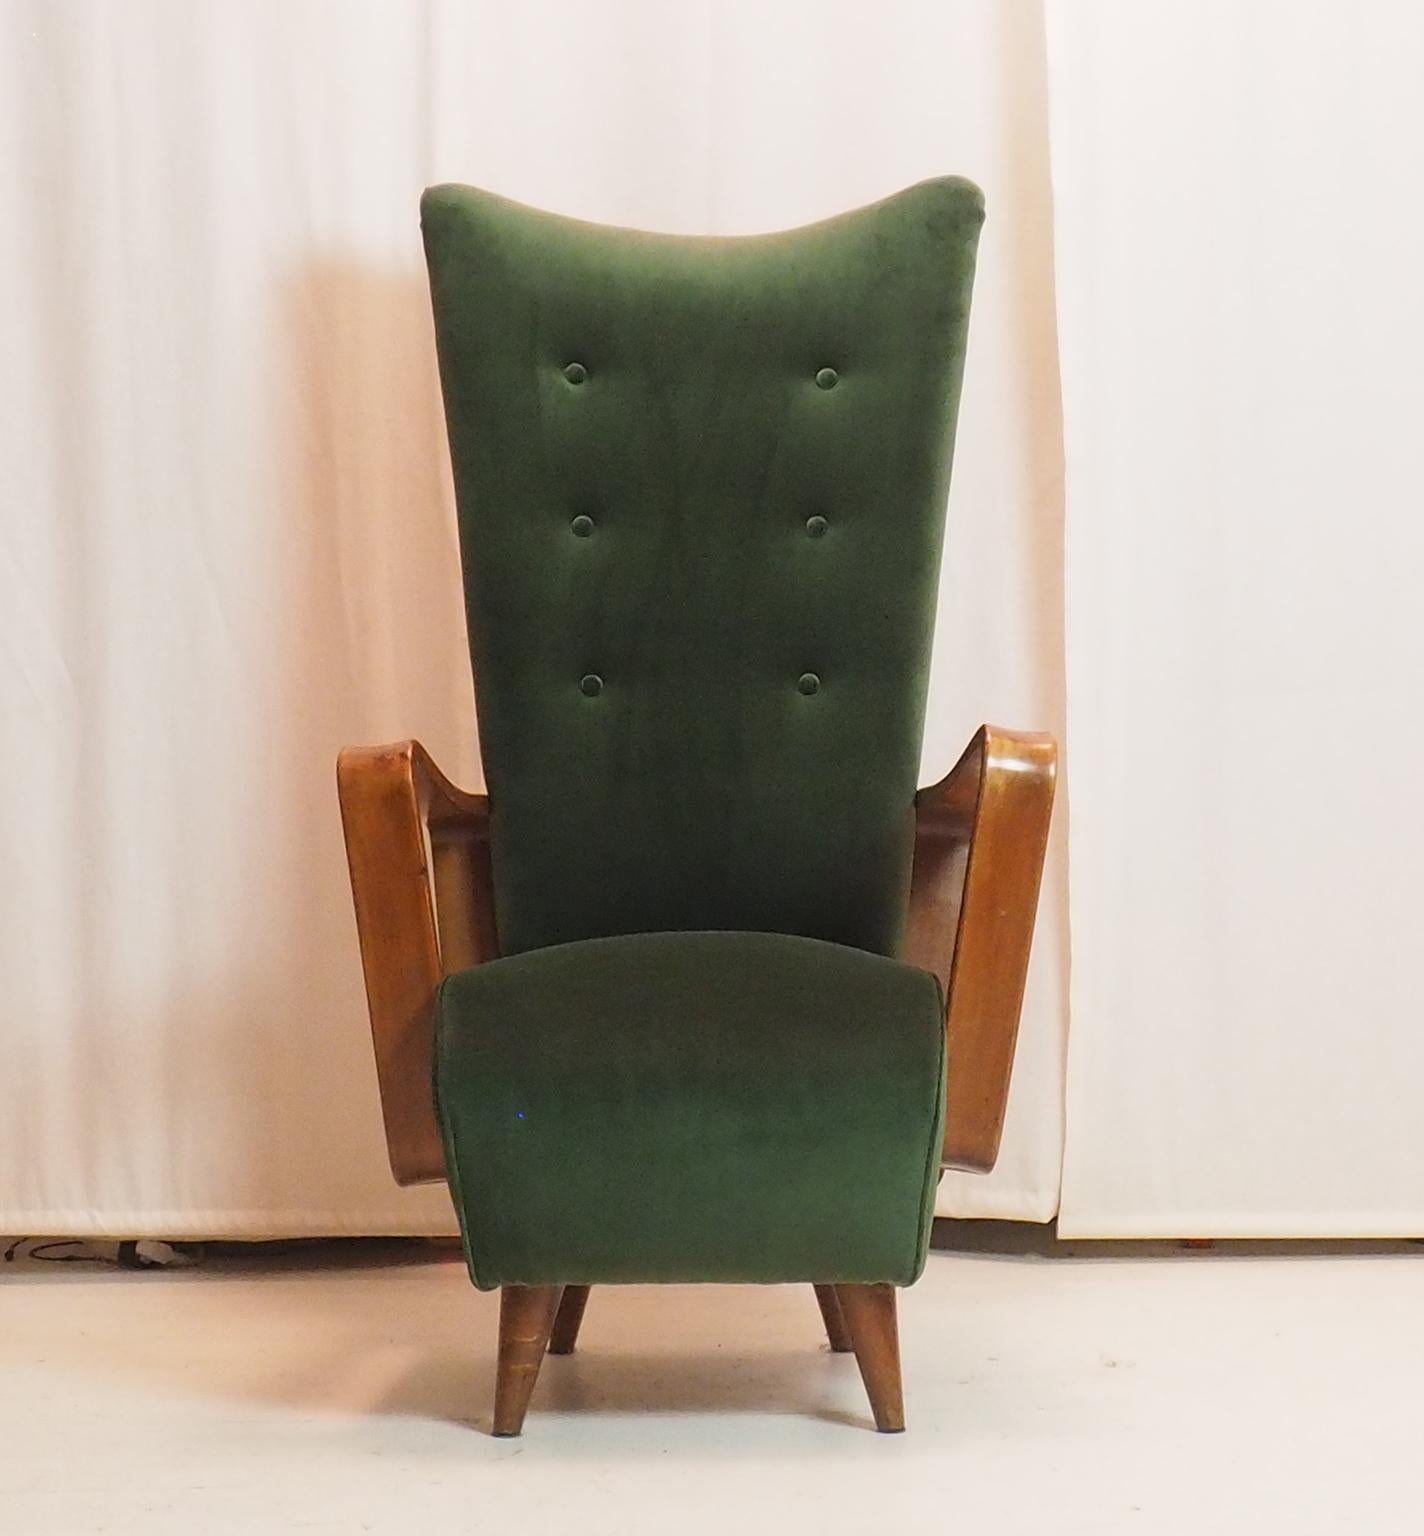 Midcentury High Back Italian Green Armchairs by Pietro Lingeri, Italy, 1950s For Sale 4